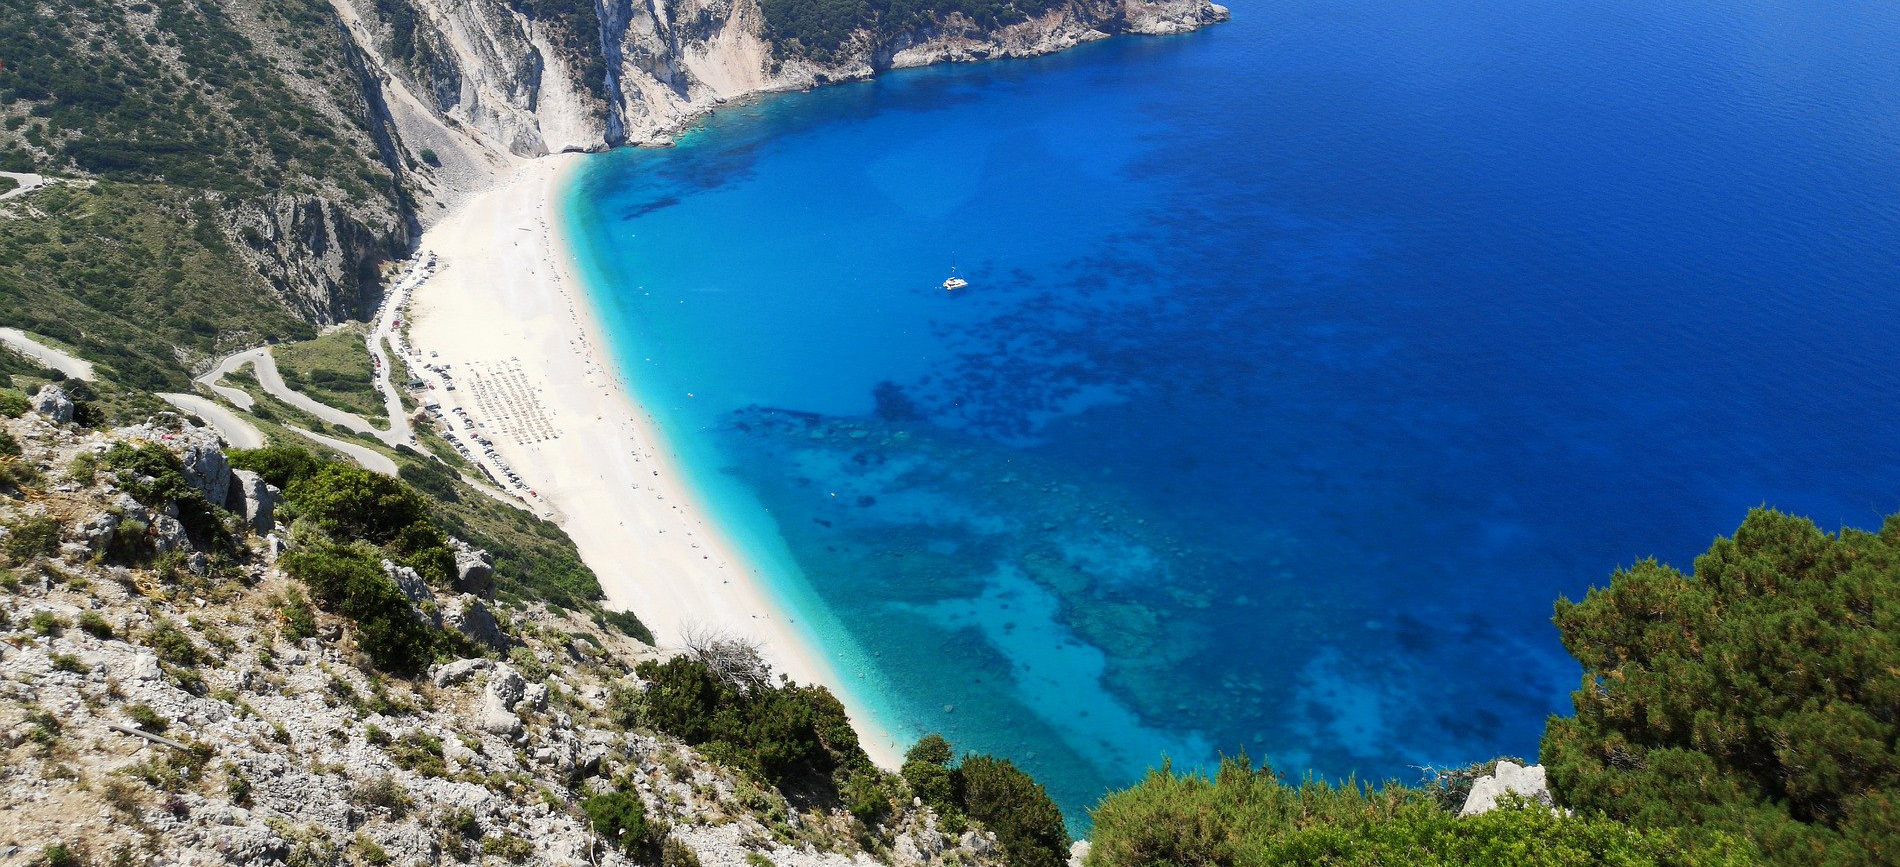 Travel Agency Kefalonia - Private Tours Kefalonia - Kefalonia Excursions - Kefalonia Tours  - Kefalonia Transfers- Taxi Transfers Kefalonia - Bust Transfers Kefalonia - Minivan Transfers Kefalonia - Private Transfers Kefalonia - Wedding Transfers Kefalonia